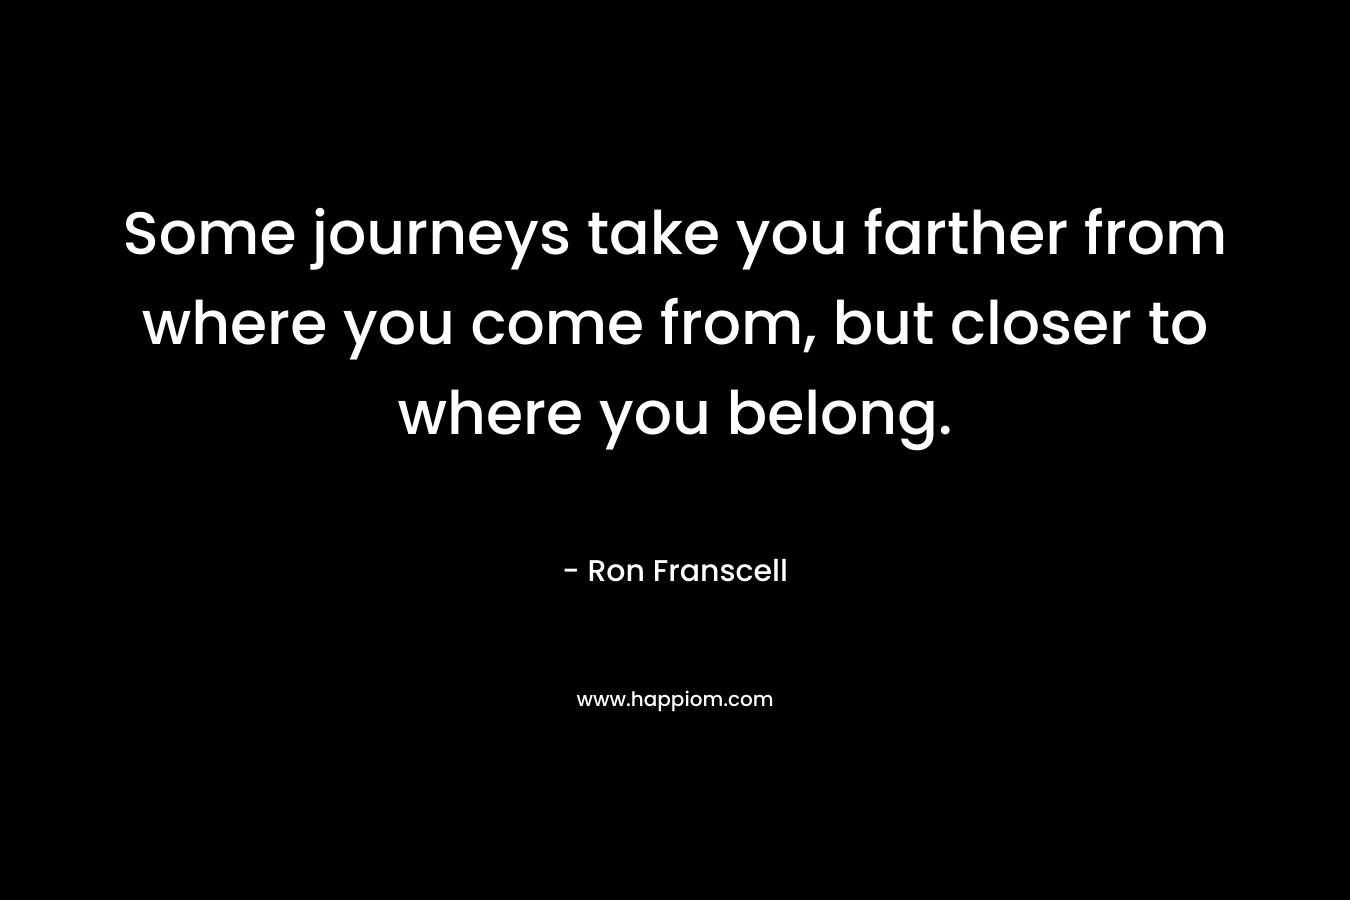 Some journeys take you farther from where you come from, but closer to where you belong.